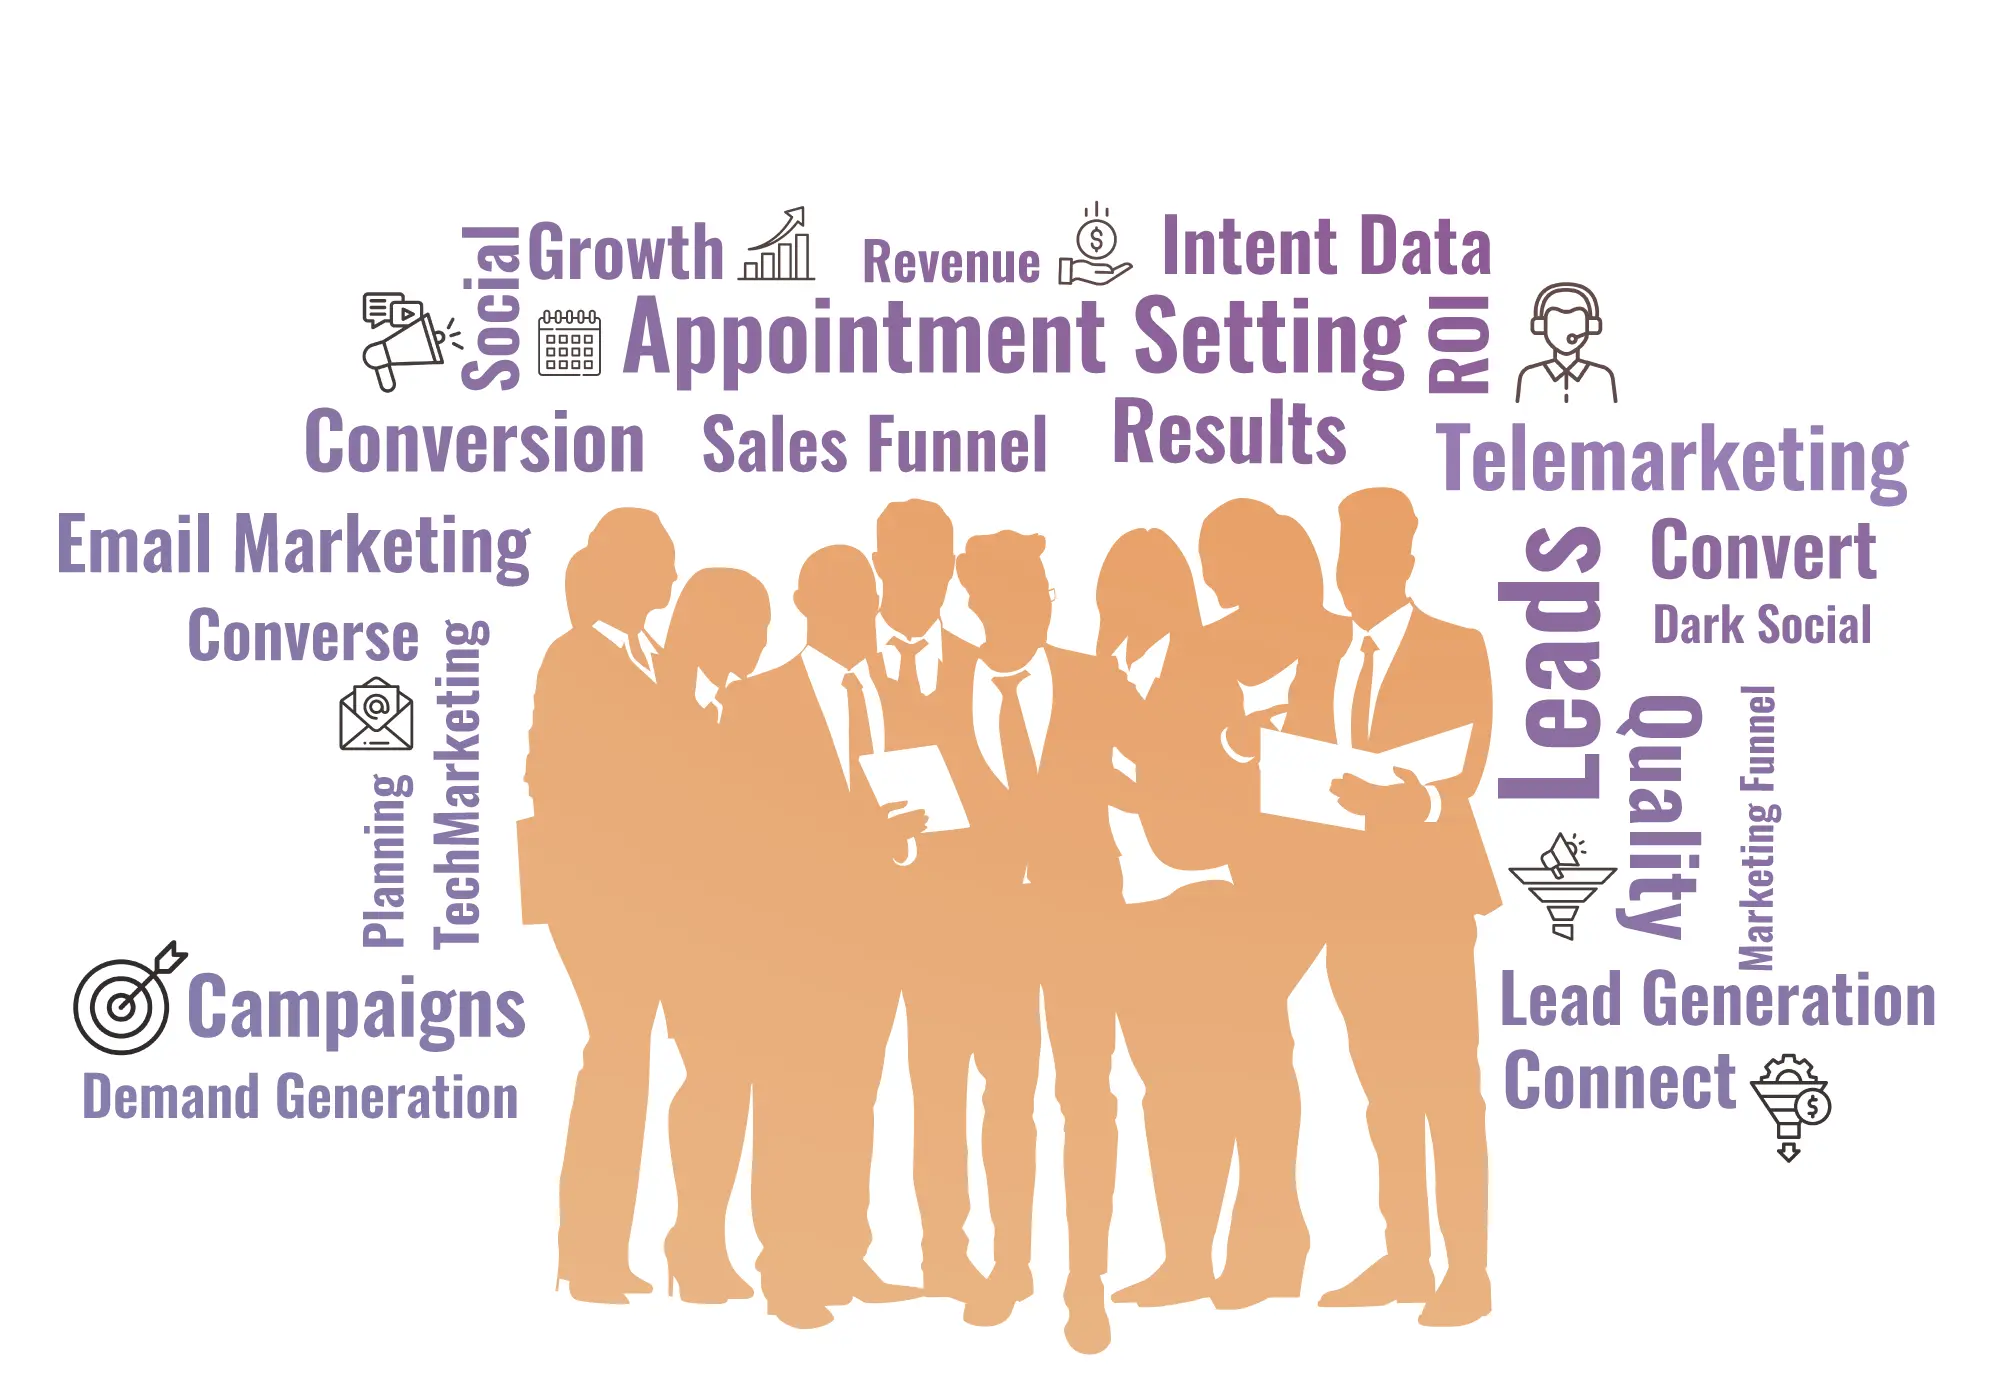 Only B2B's Lead Generation Services